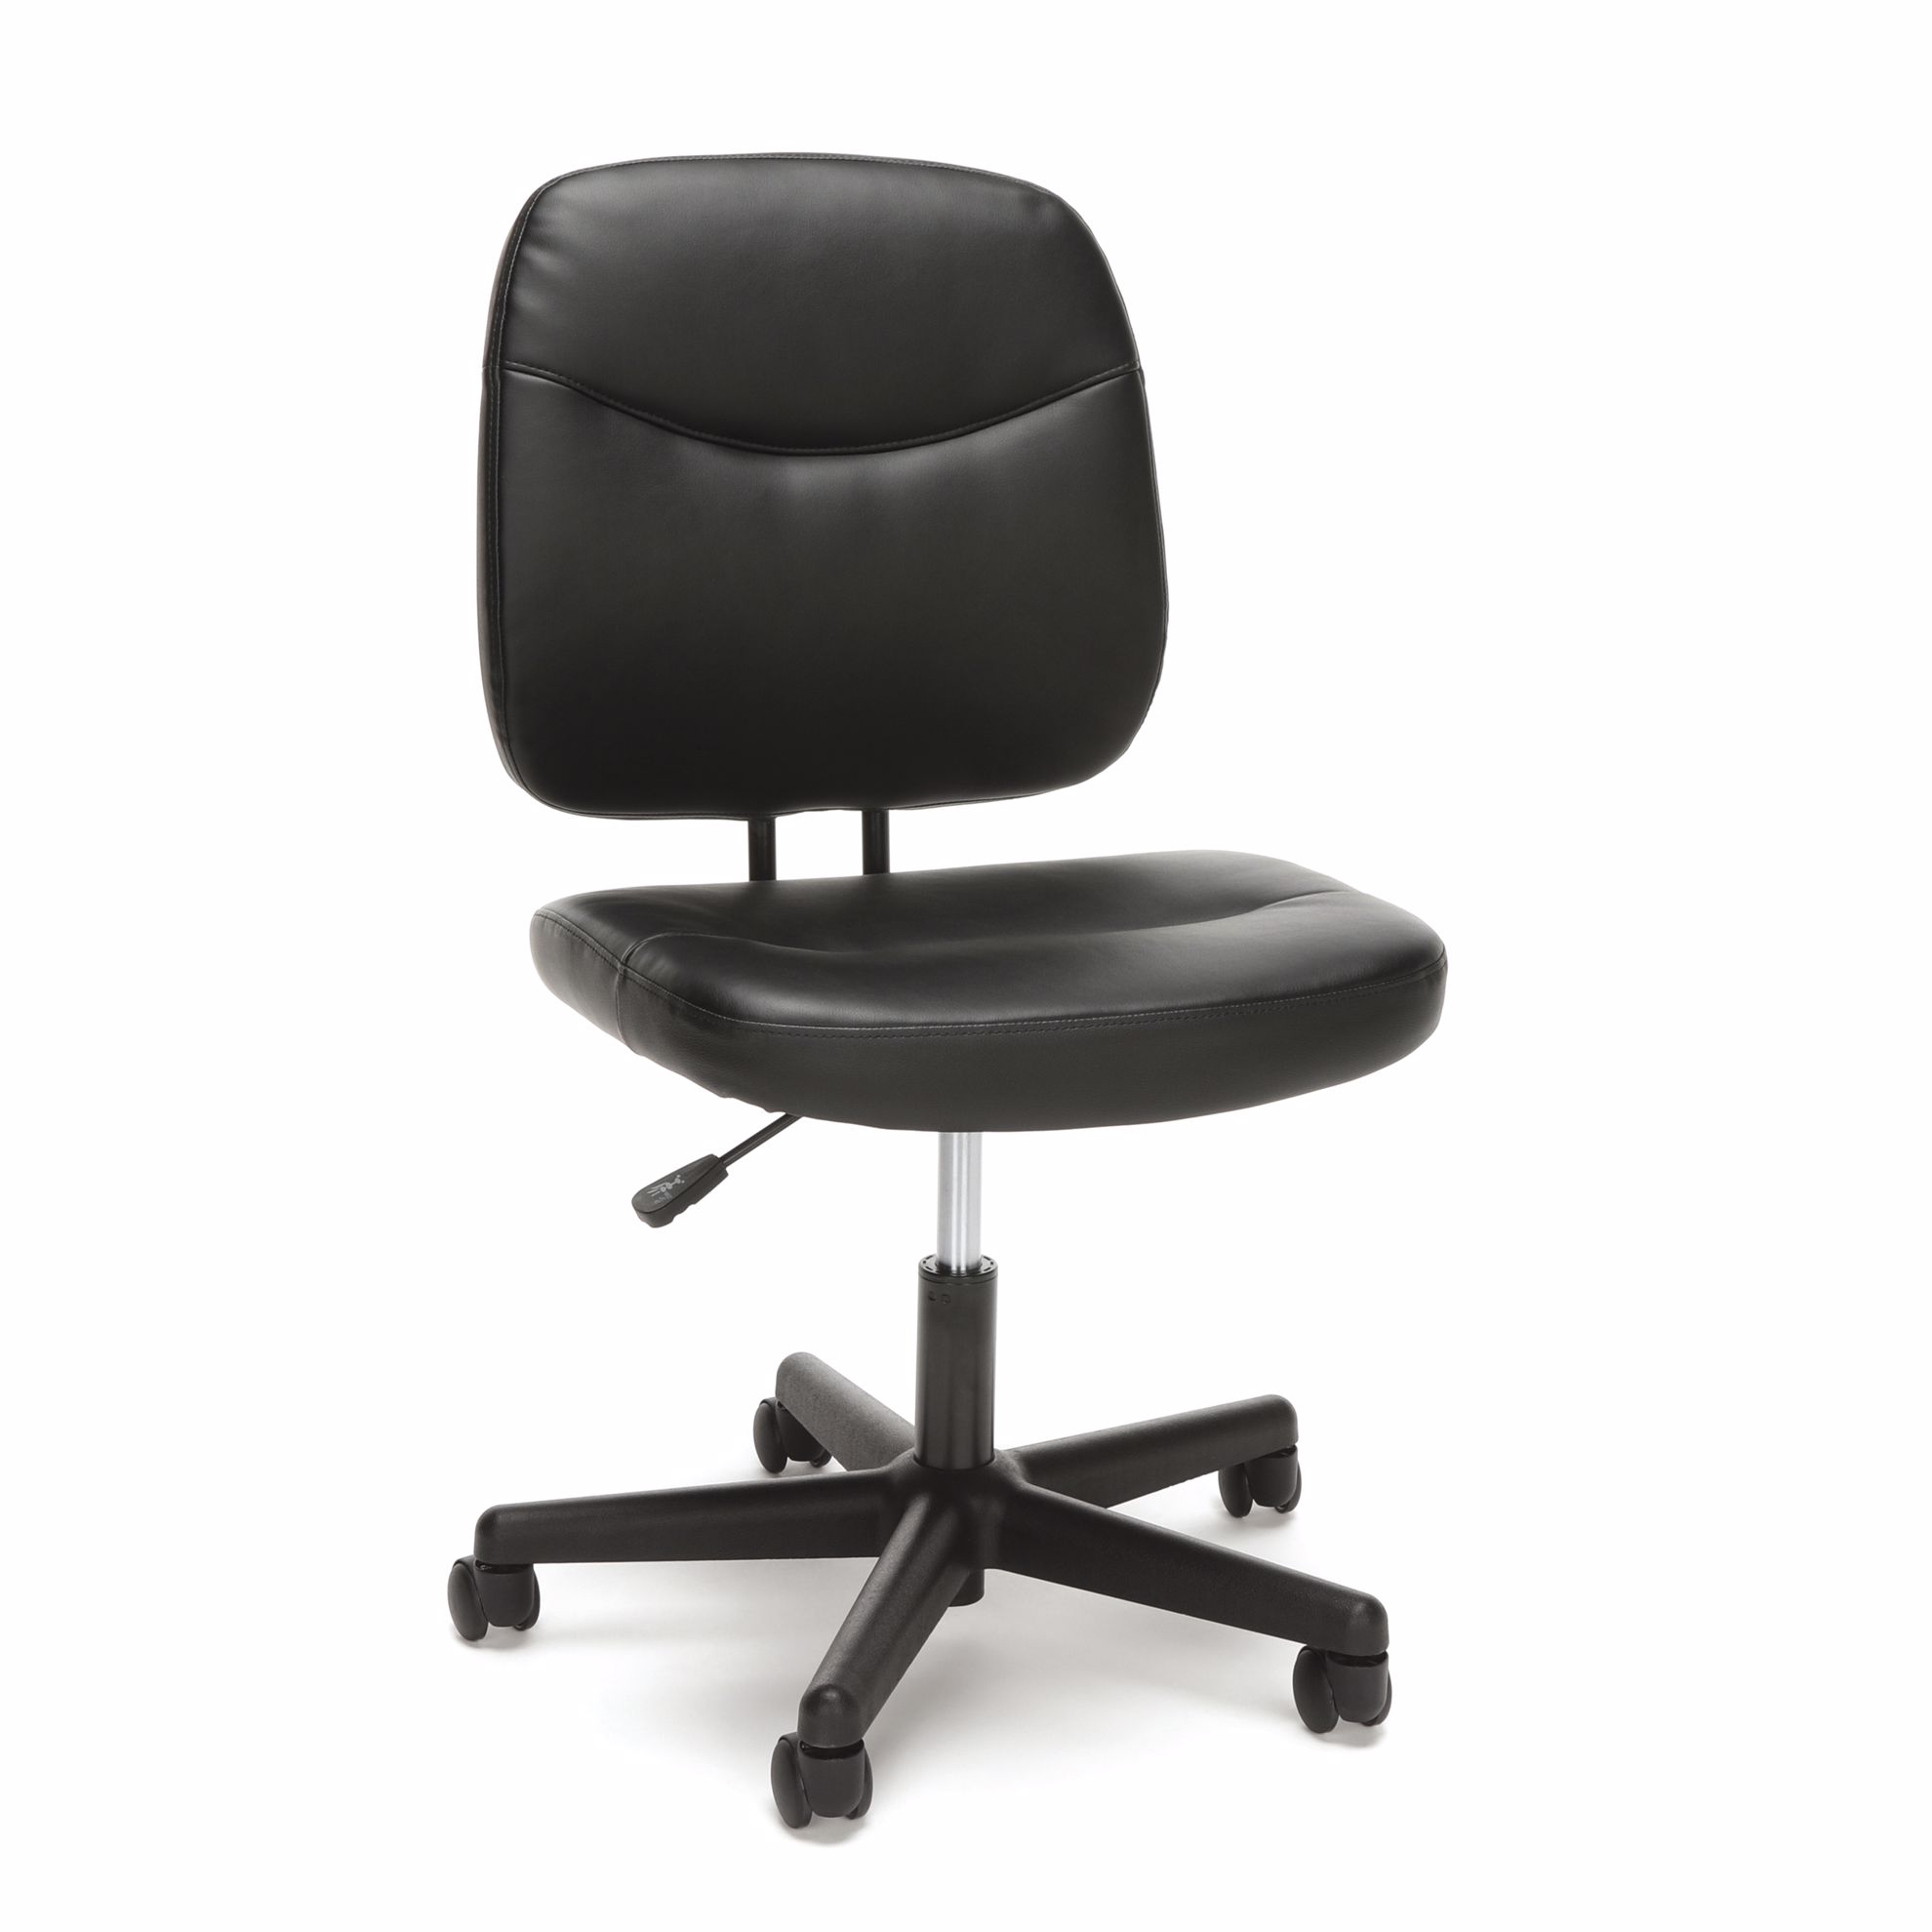 Essentials Collection Armless Leather Desk Chair in Black 